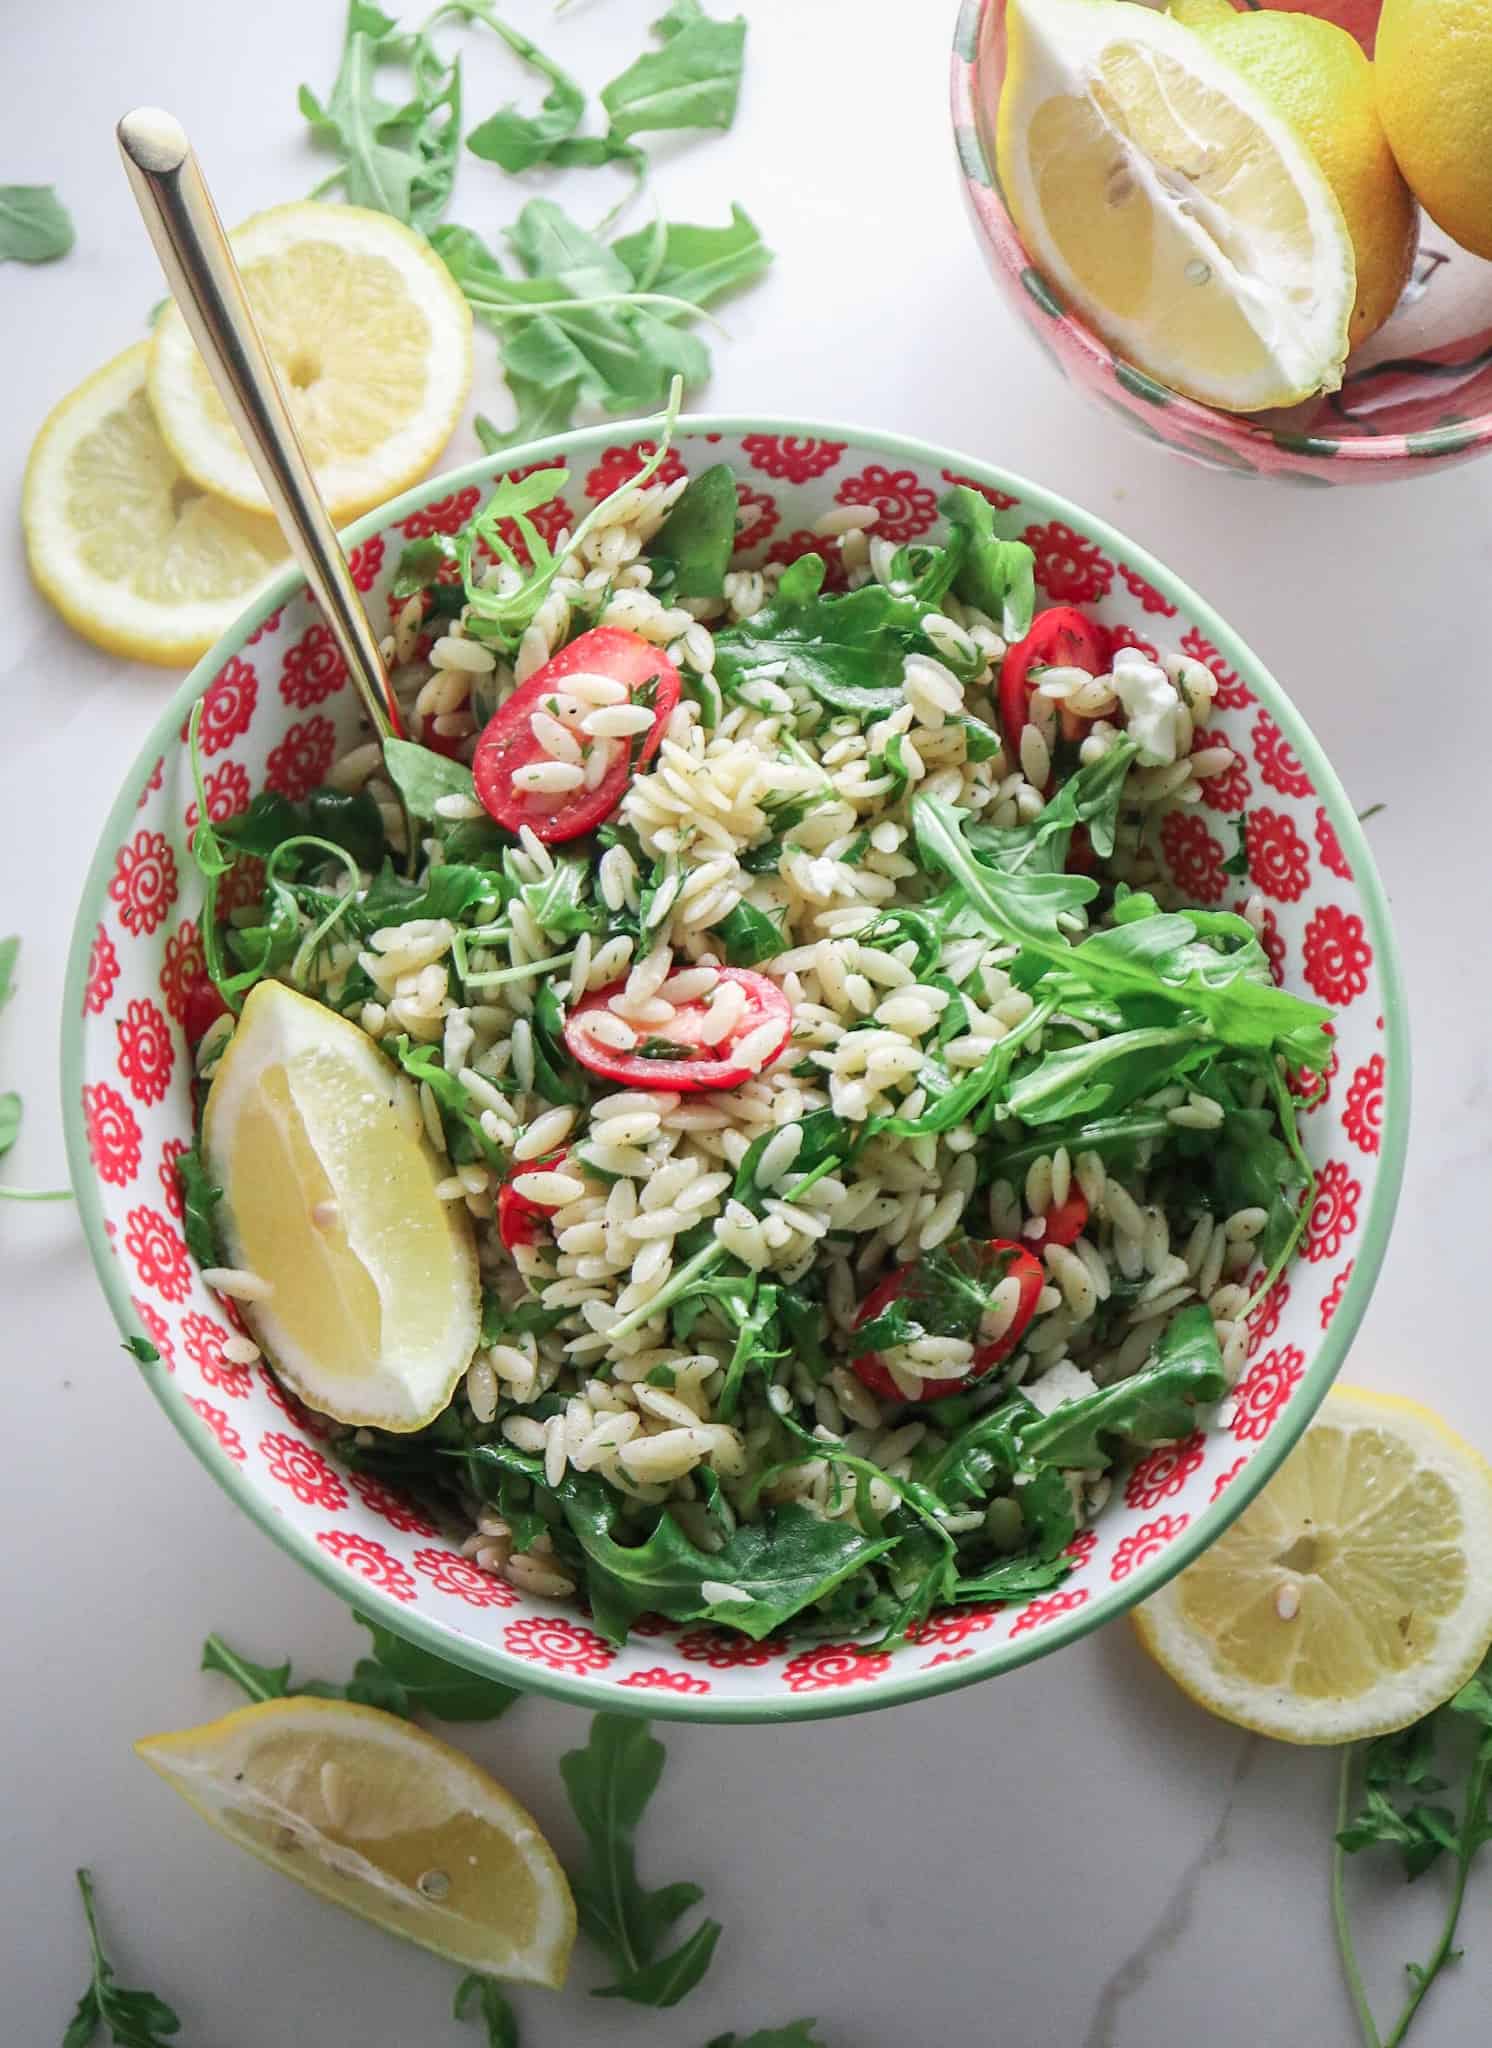 pasta salad with freshly squeezed lemon juice and herbs in a red bowl with fresh basil and lemon